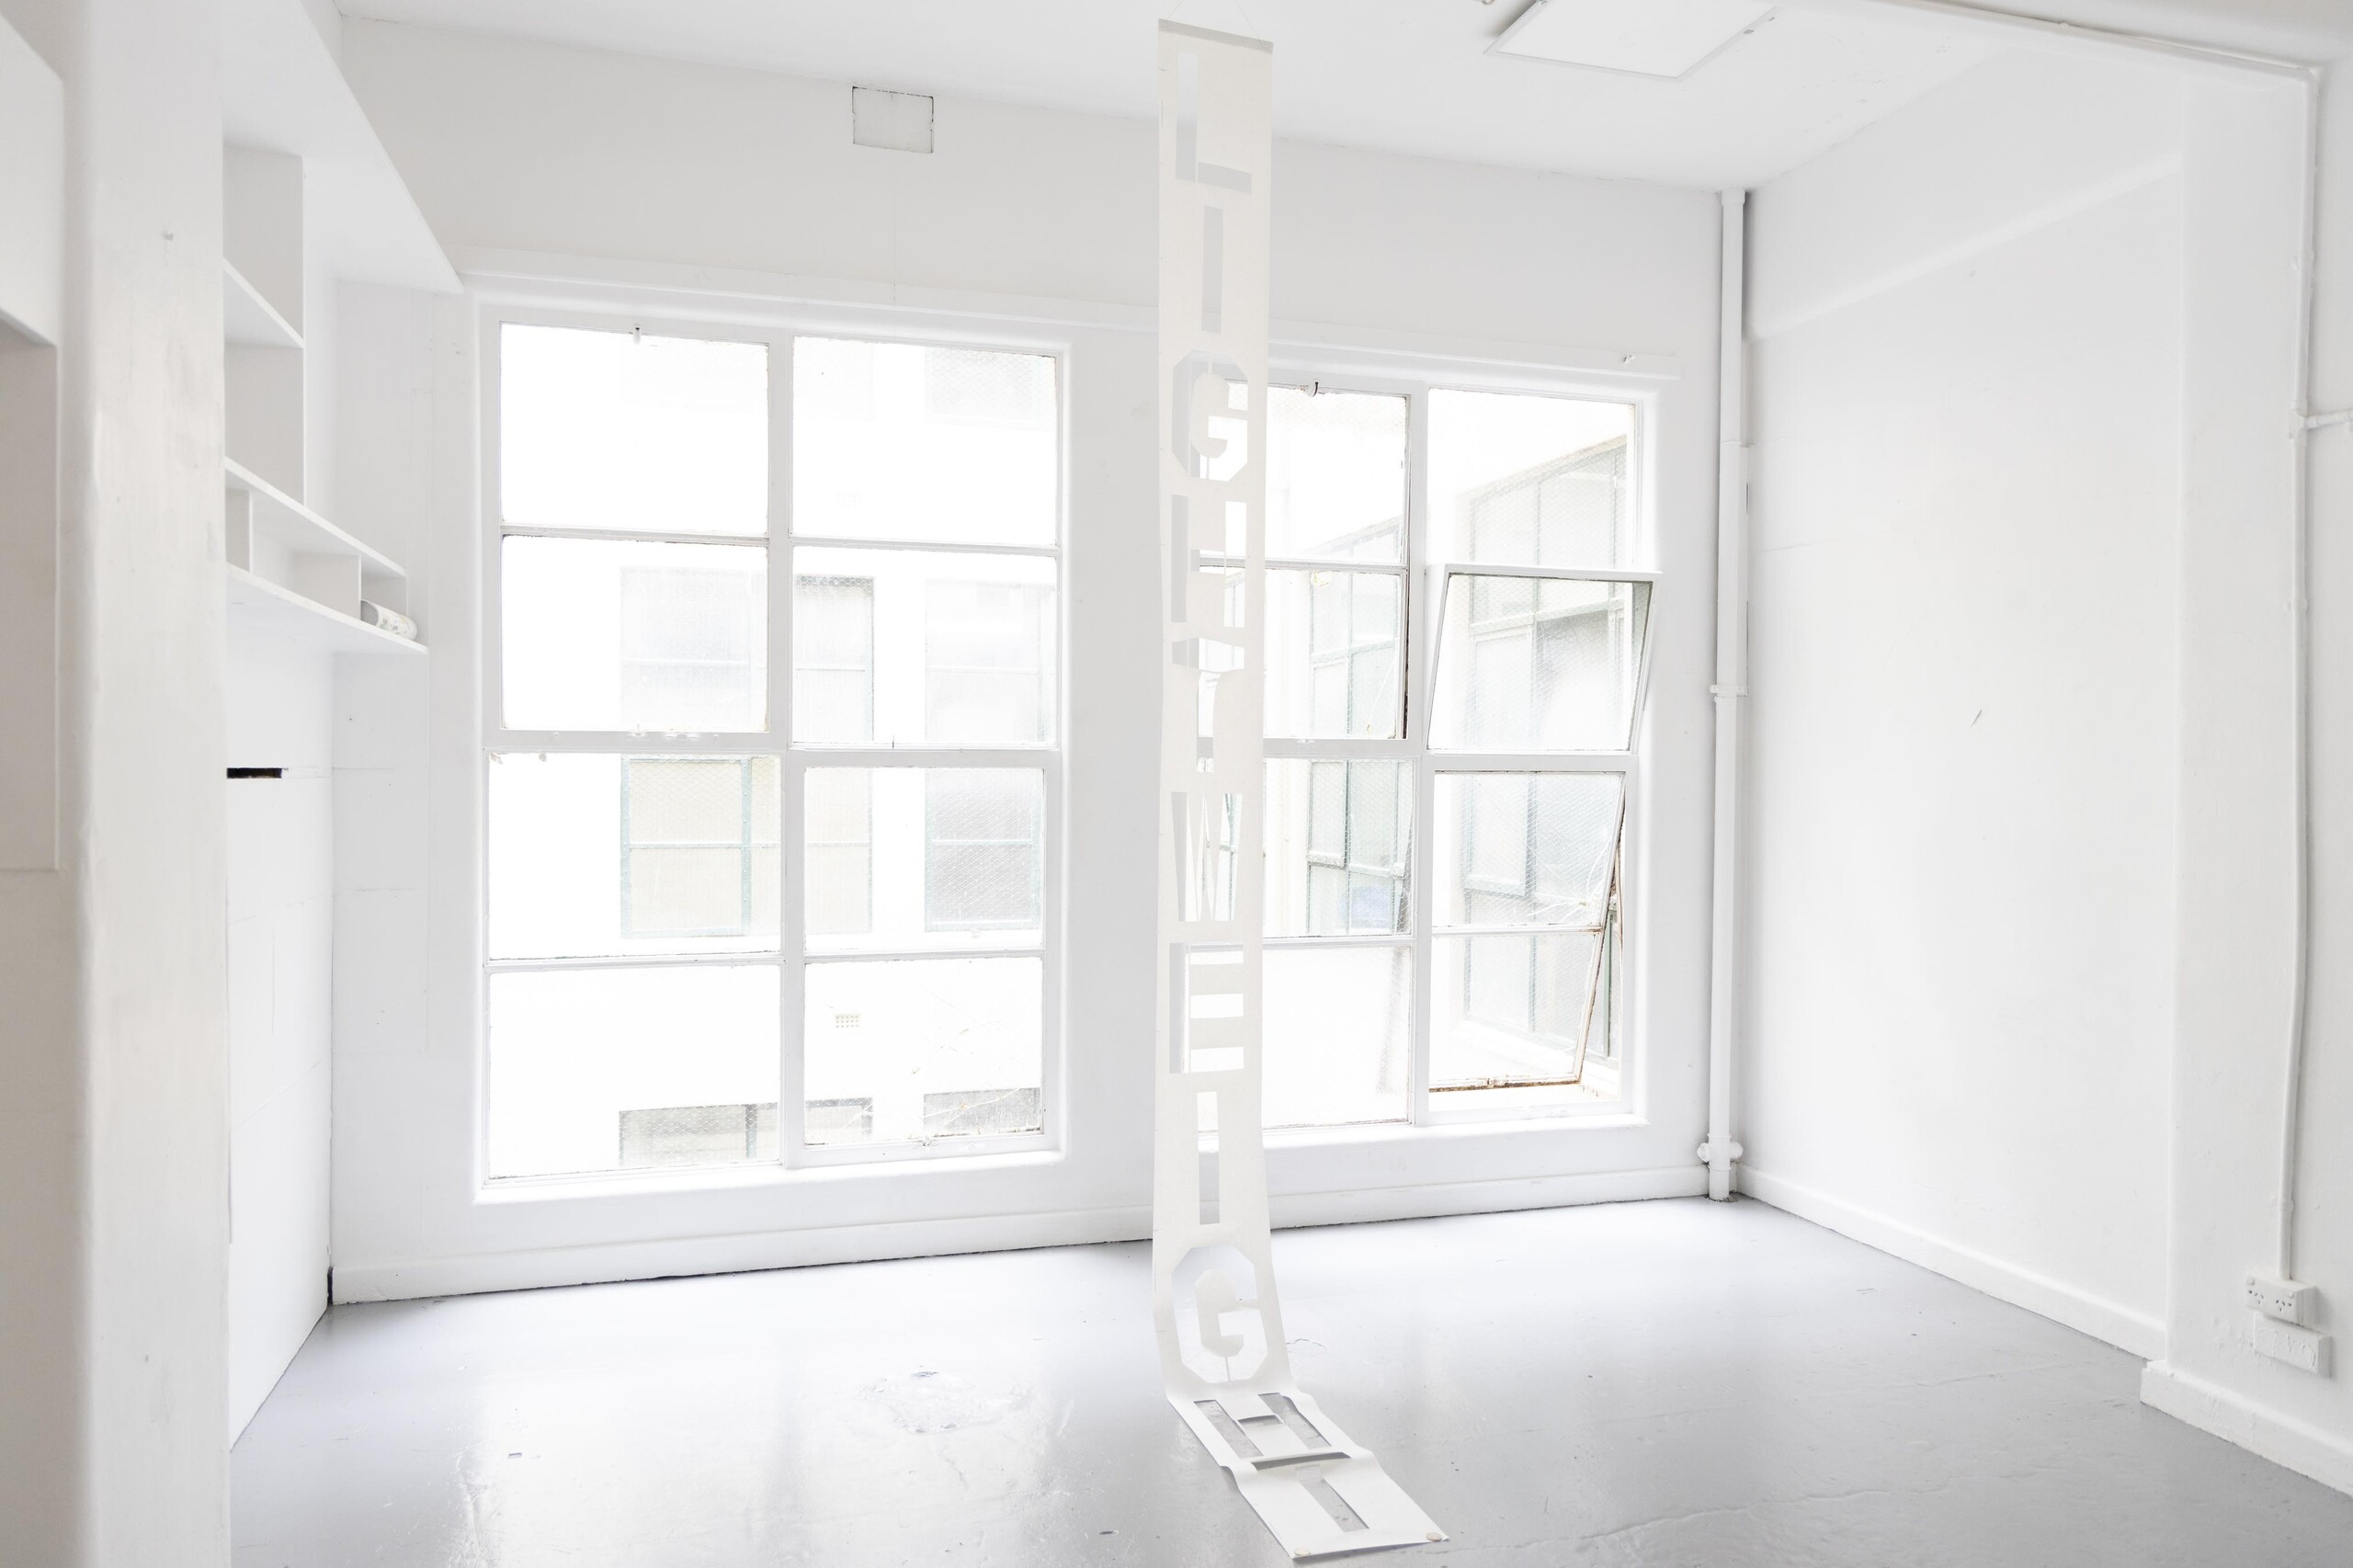 Installation view of Rose Nolan, <em>Light Weight / Light Well</em>, 2023, Hyacinth Gallery, Melbourne. Photo: Nicholas Mahady. Courtesy of the artist and Hyacinth.